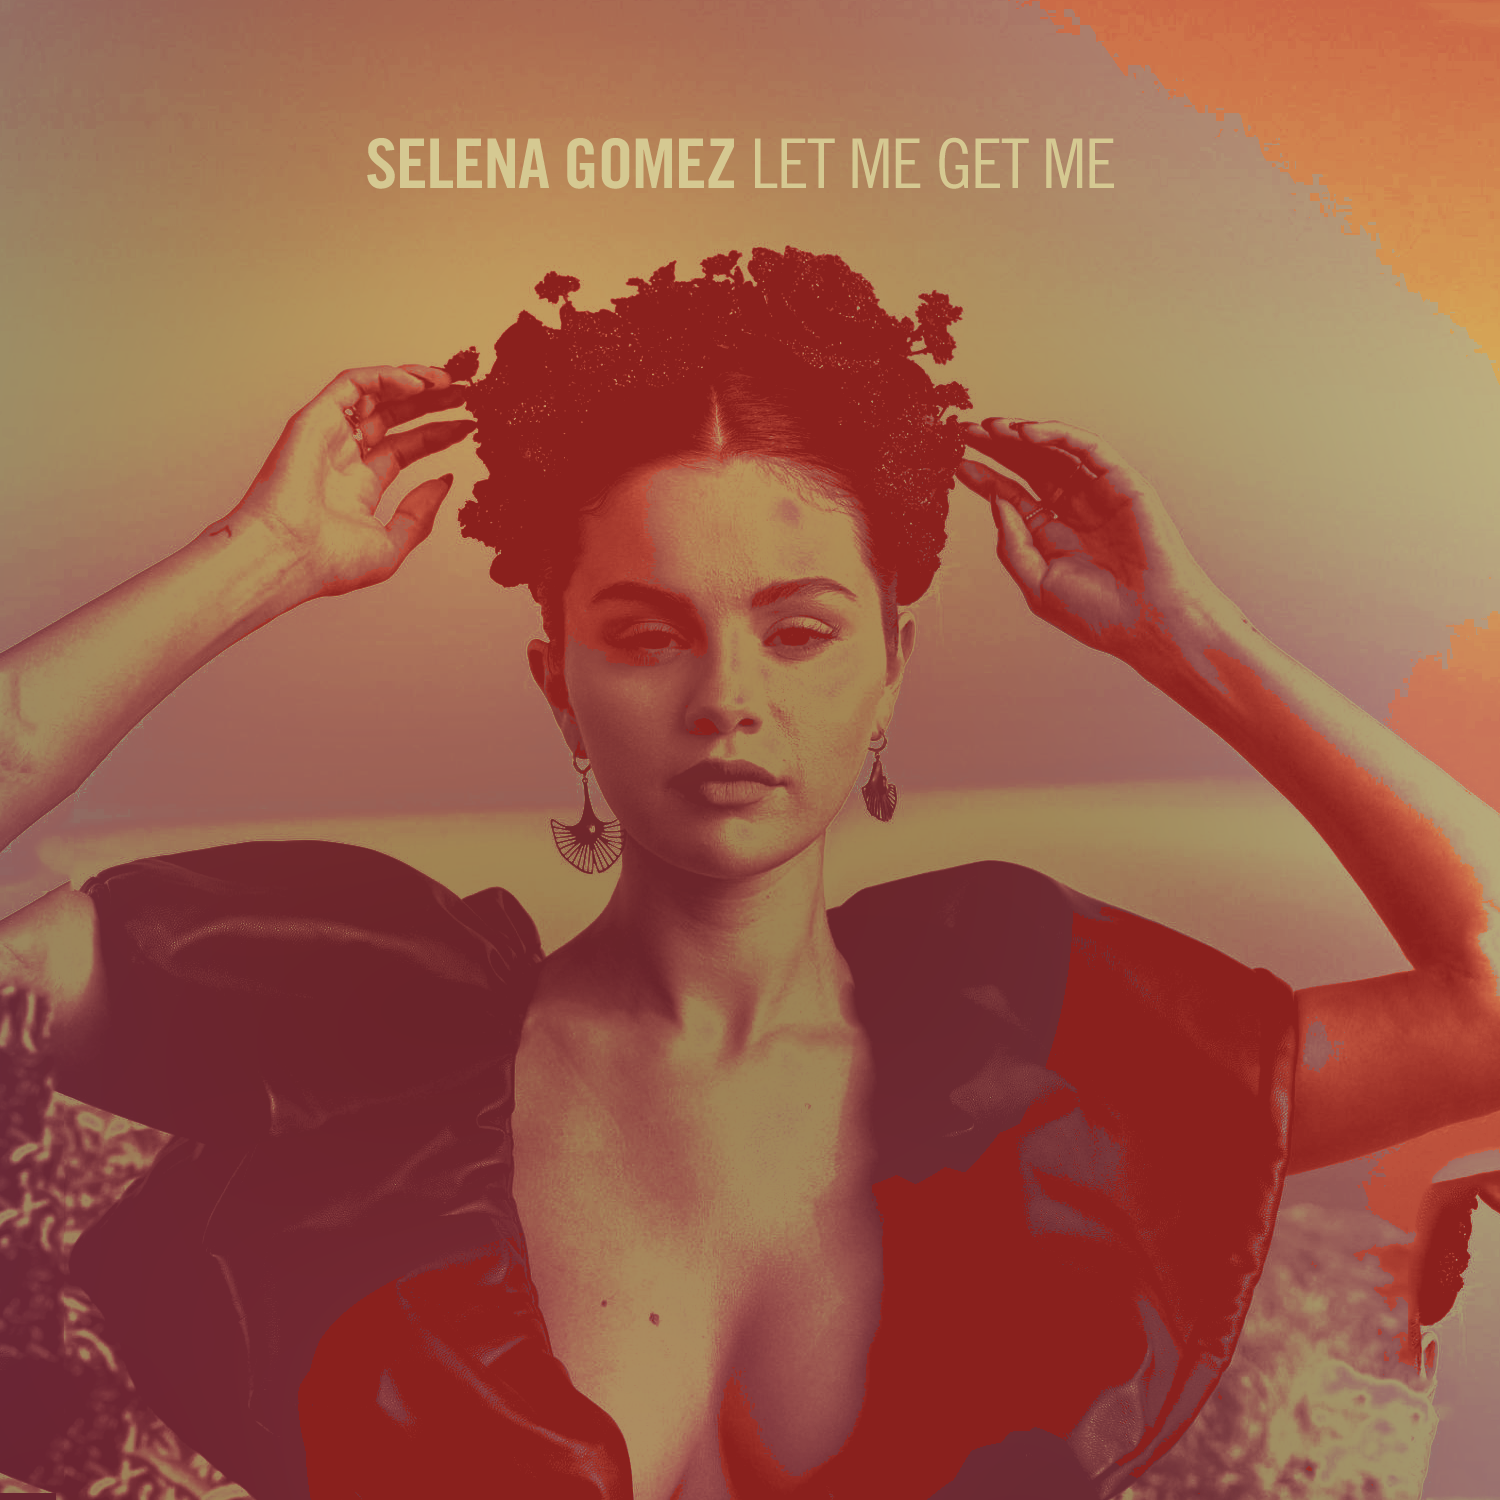 Selena Gomez - Let Me Get Me (Fanmade Cover)